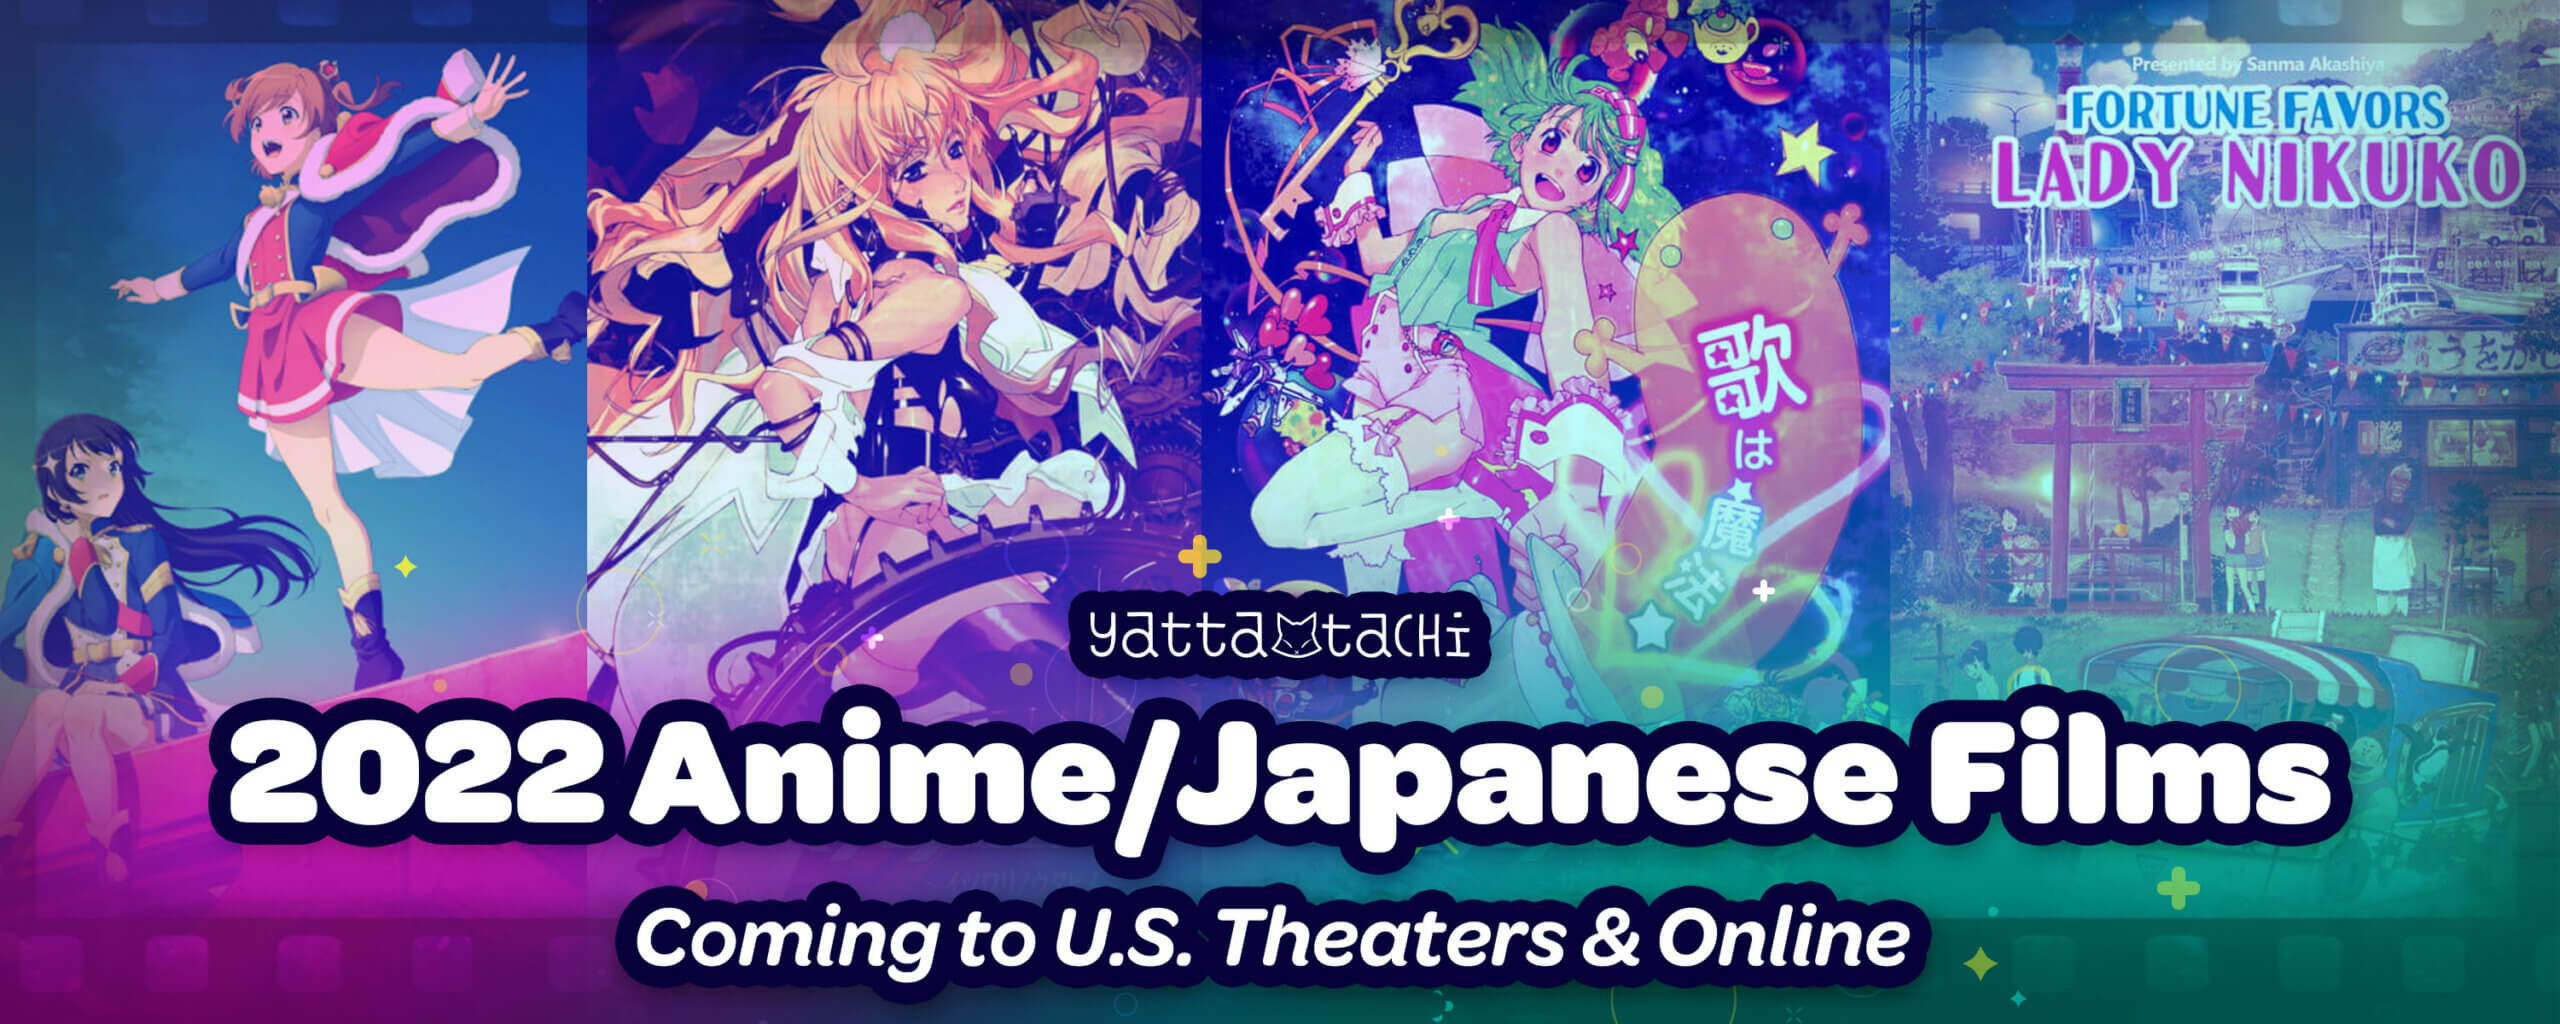 2022 Anime / Japanese Films Coming to . Theaters & Online | Yatta-Tachi